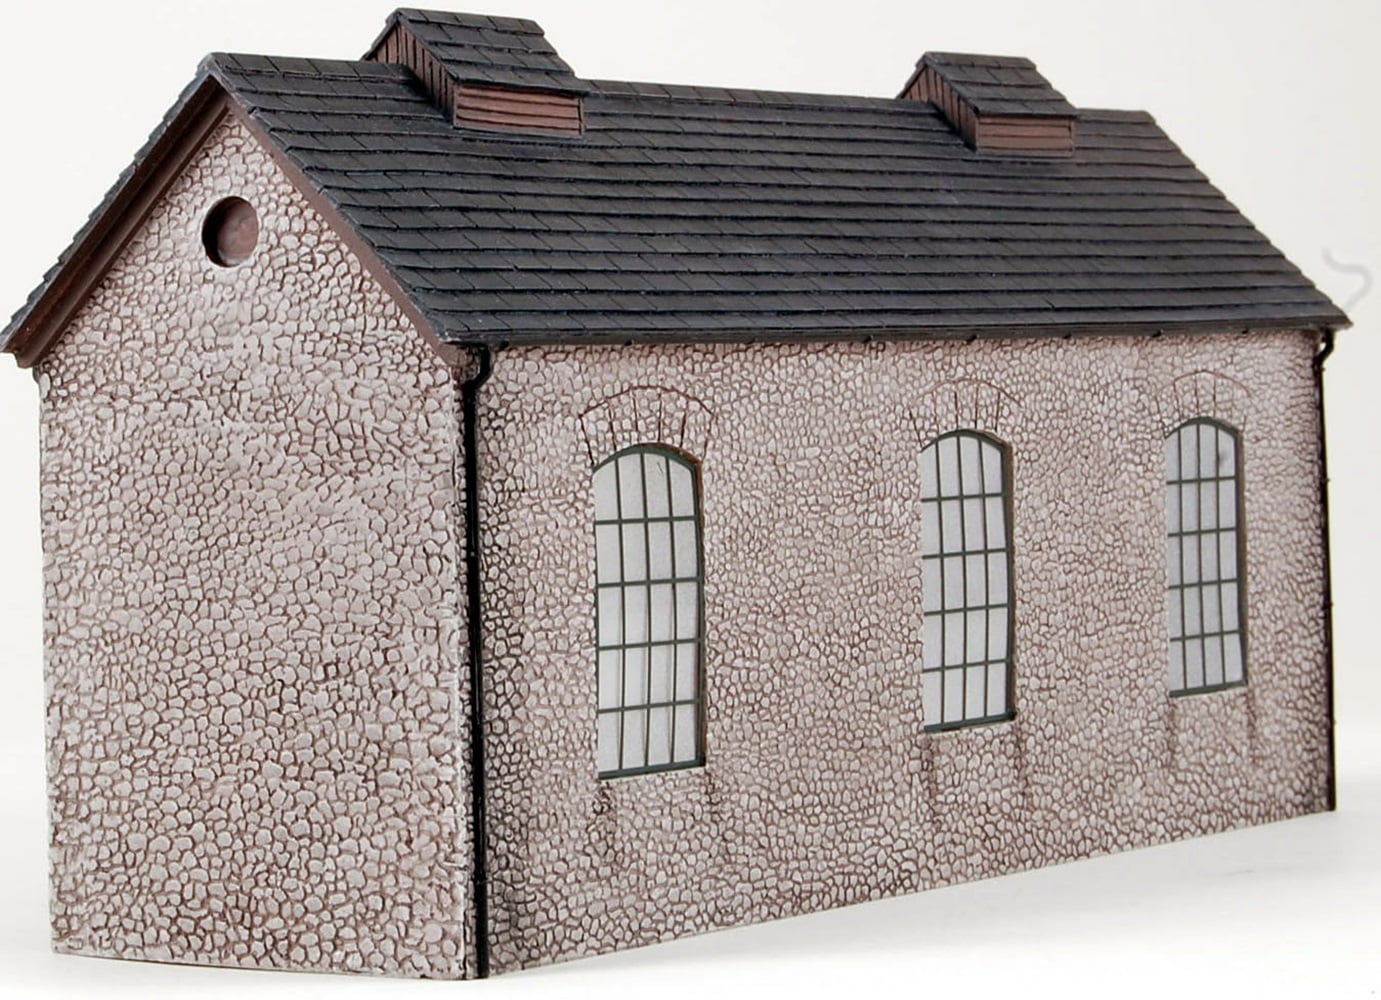 Bachmann Trains HO Scale Thomas & Friends Engine Shed Resin Building  Scenery Item